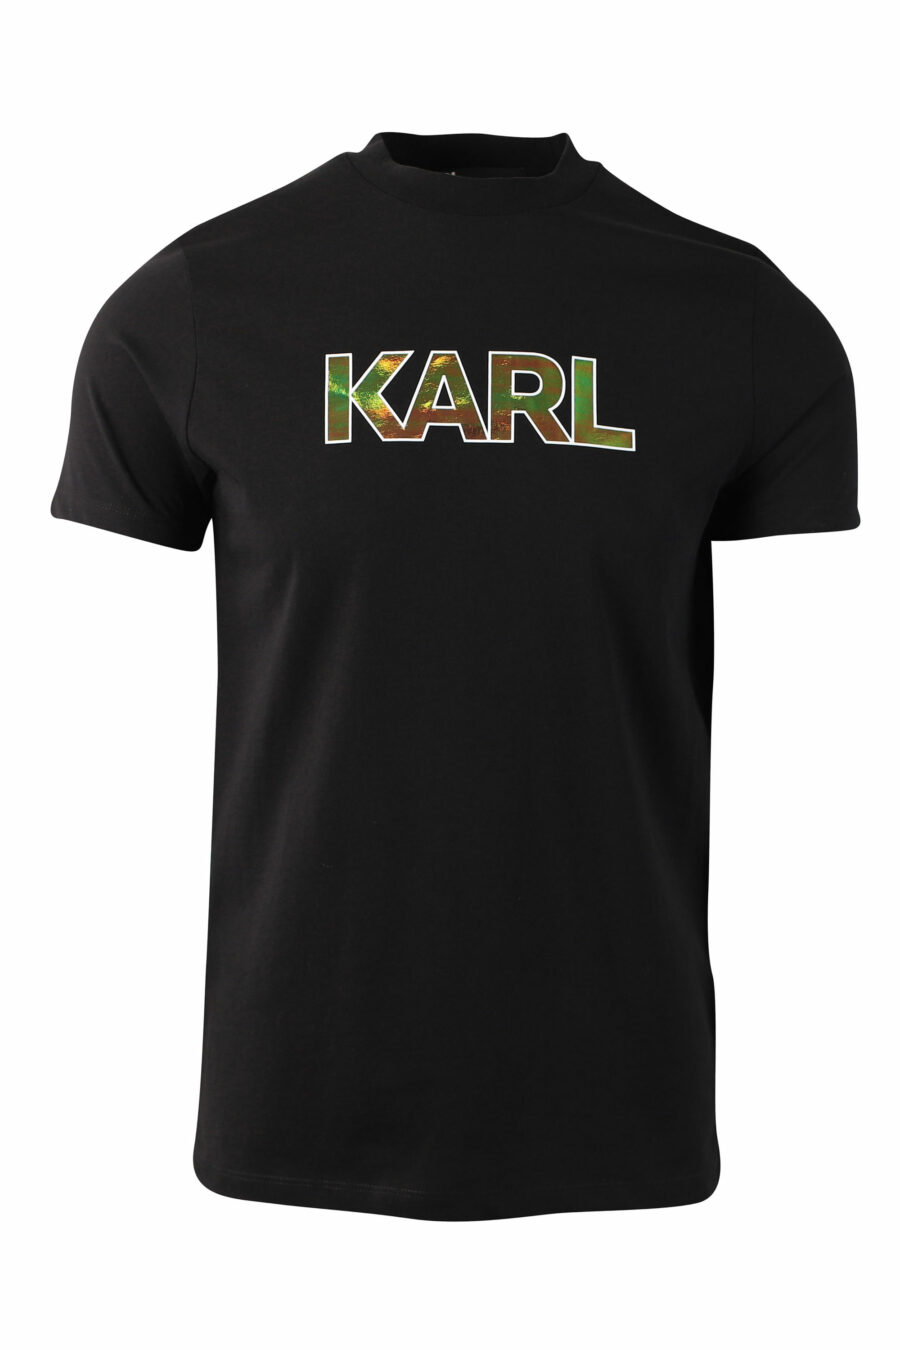 Black T-shirt with holographic logo centred - IMG 0019 1